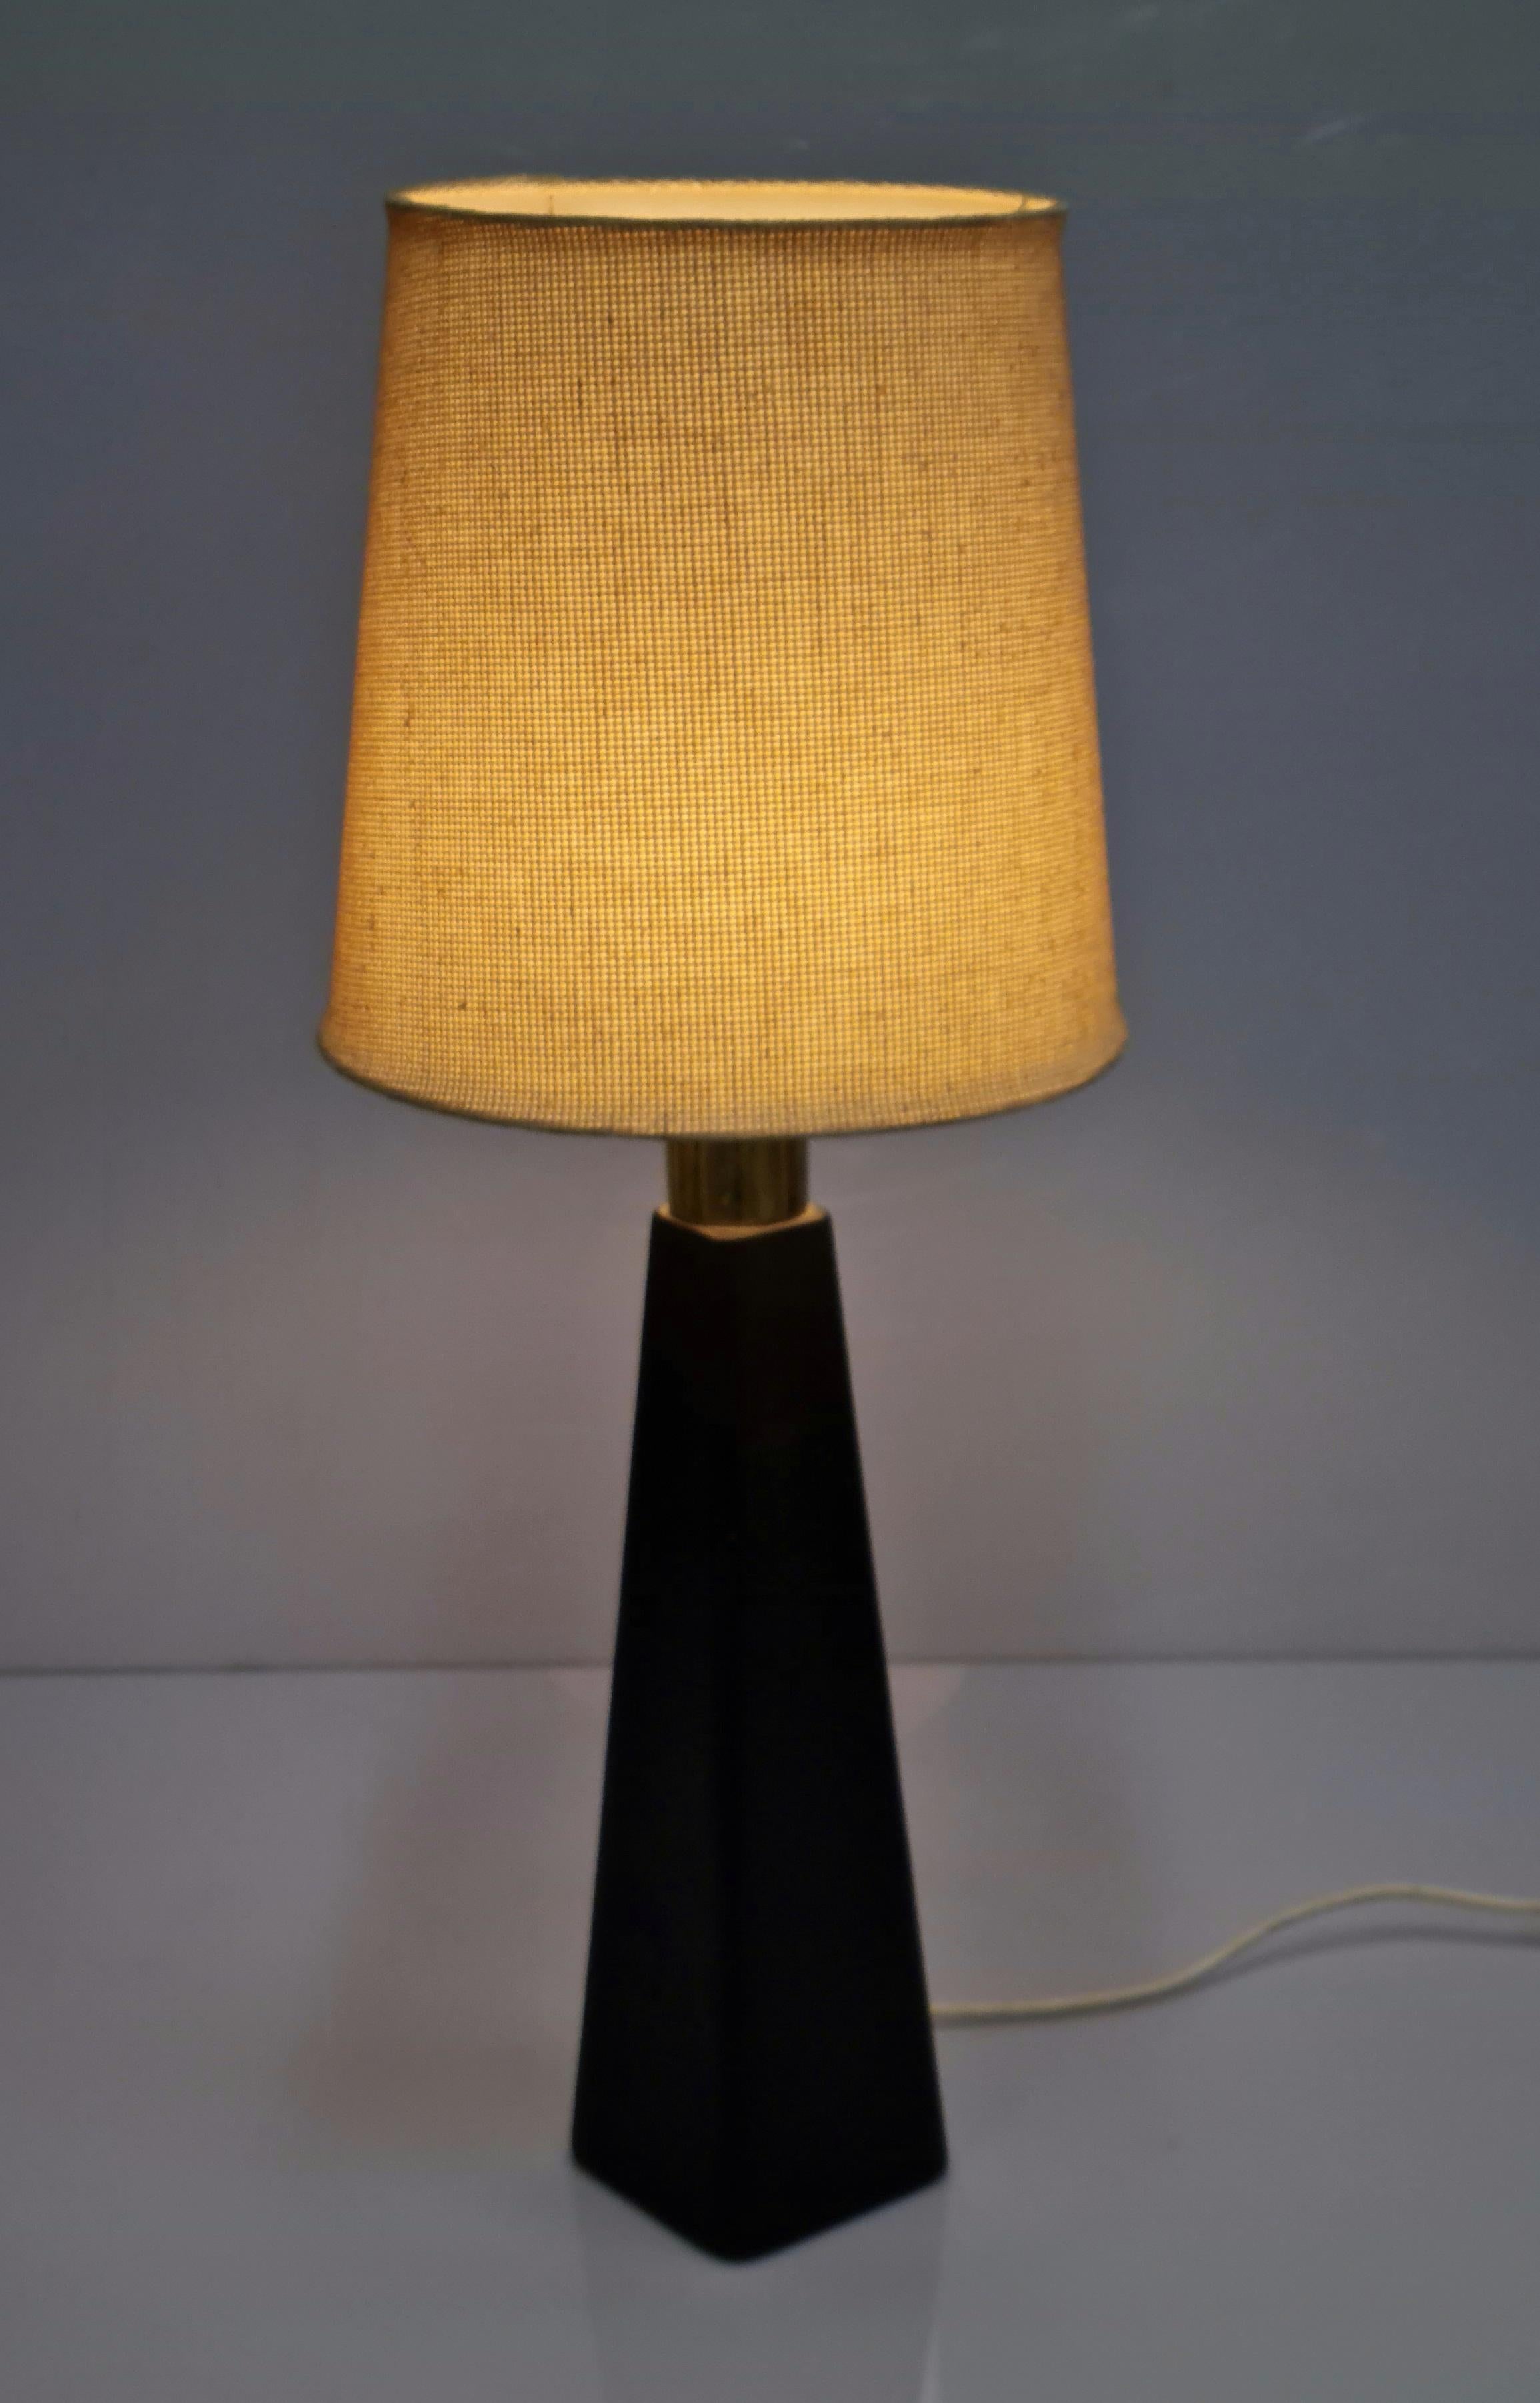 Lisa Johansson-Papé Table Lamp 46-186 LJP in Leather and Linen, Orno For Sale 3